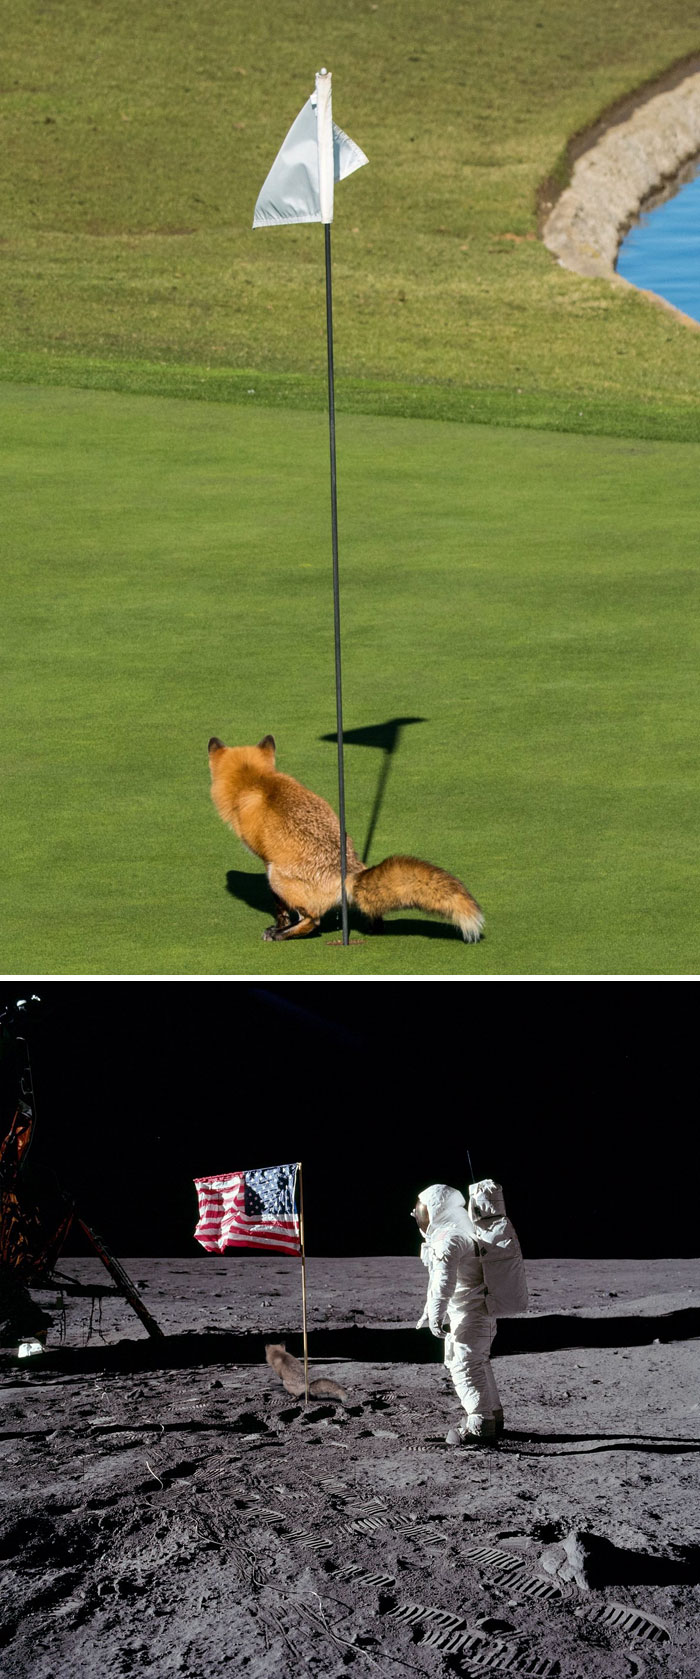 This Fox Pooing In A Golf Putting Hole